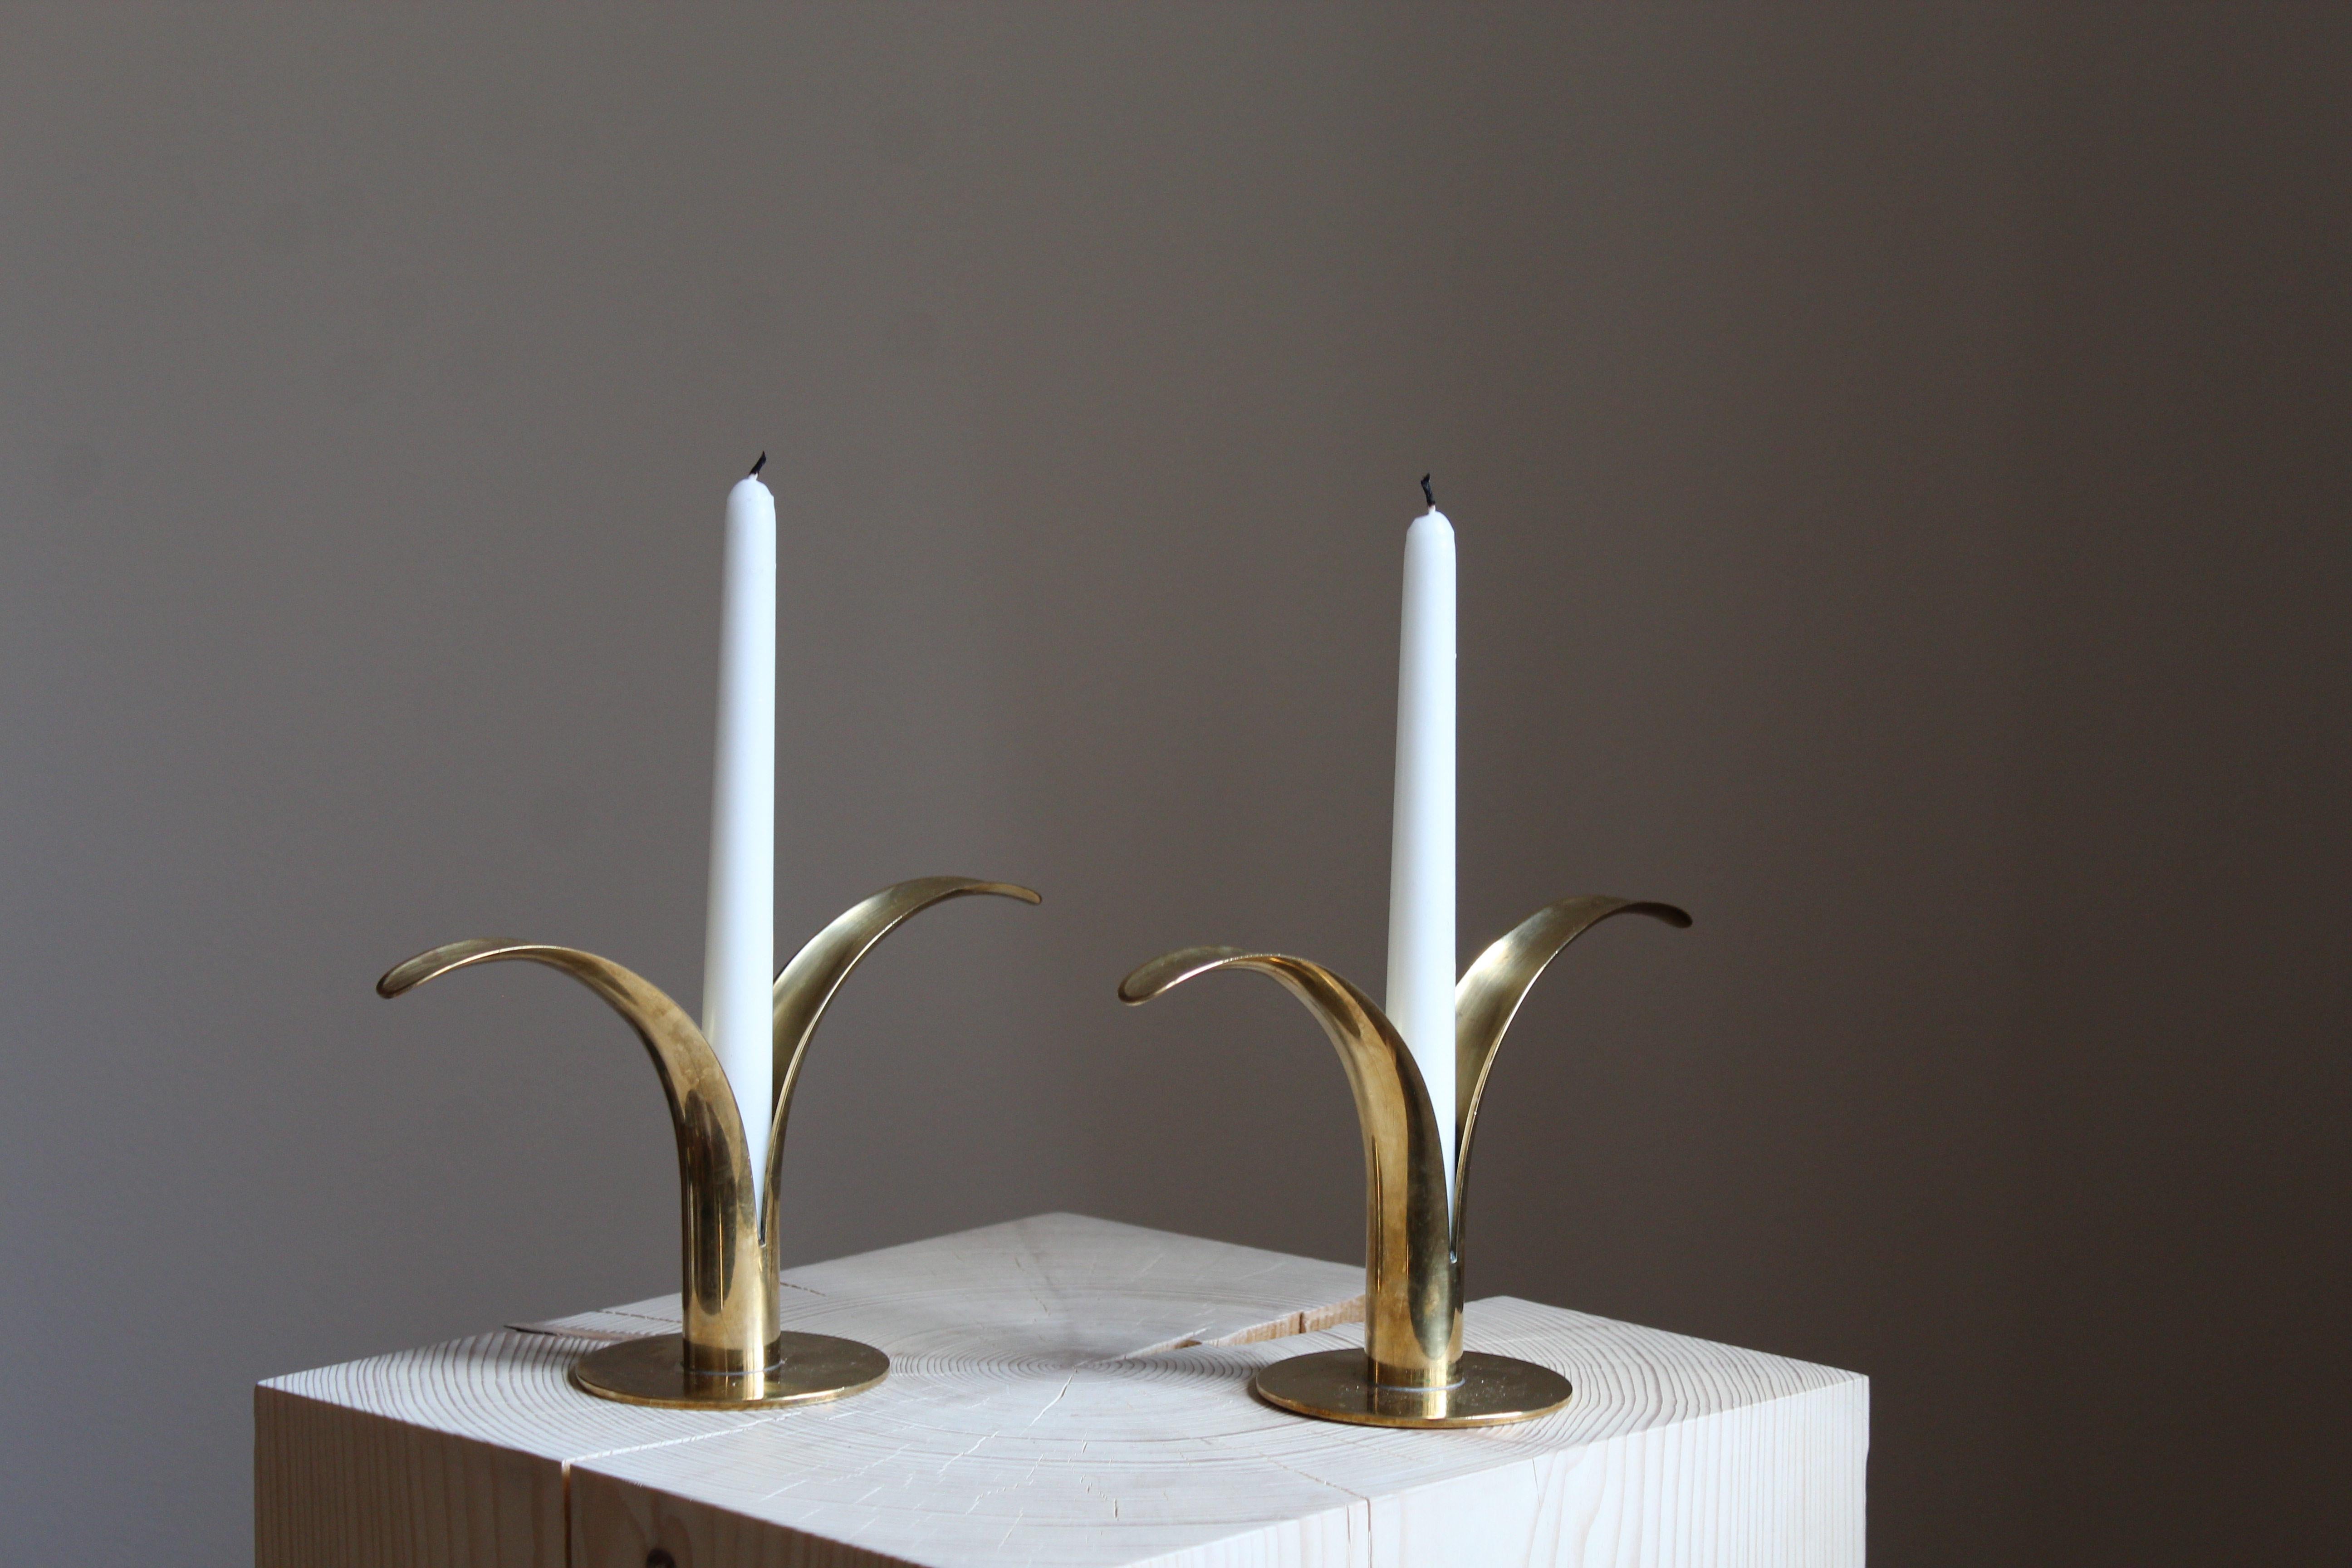 A pair of organic candlesticks / candleholders, designed by Ivar Åhlenius Björk for Ystad Metall, Sweden, 1950s. In brass and lacquered steel. Stamped.

Other designers of the period include Piet Hein, Paavo Tynell, Josef Frank, and Jean